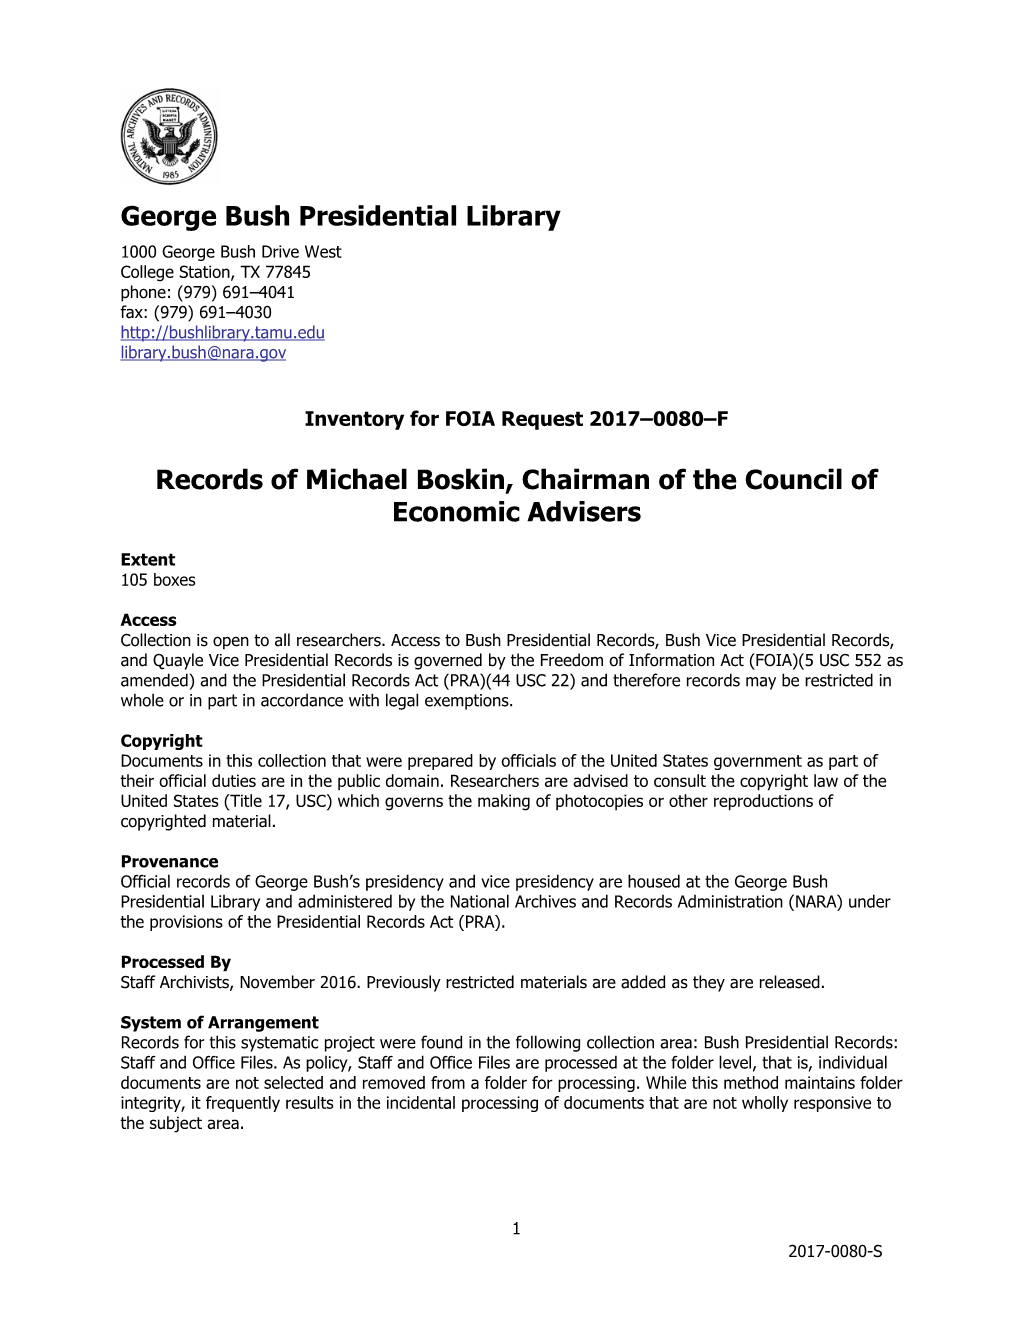 George Bush Presidential Library Records of Michael Boskin